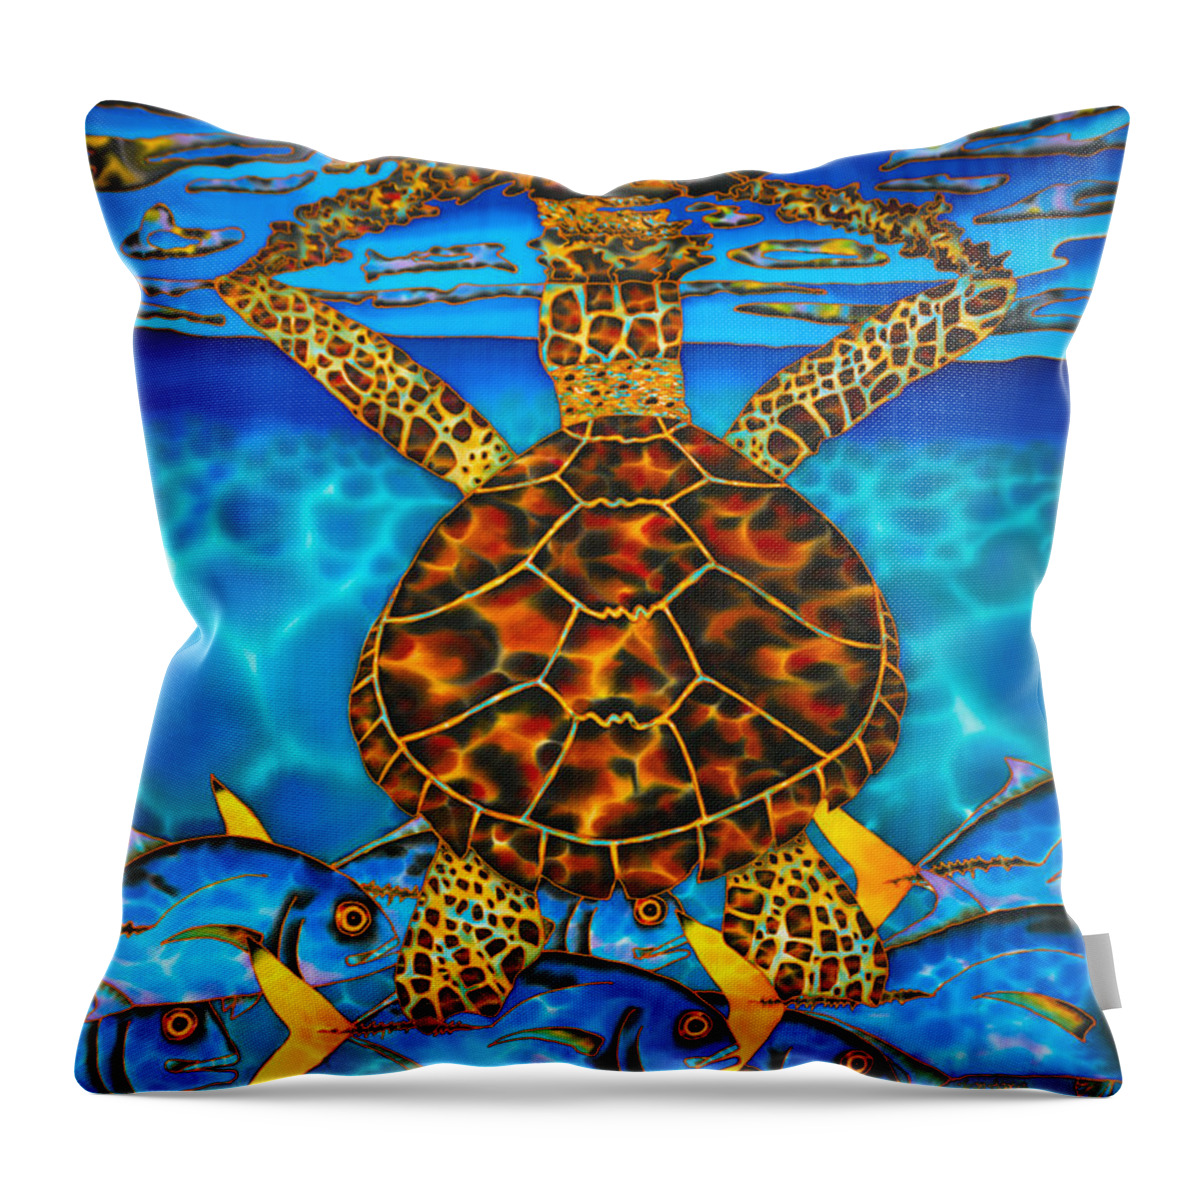 Sea Turtle Throw Pillow featuring the painting West Indian Hawksbill Sea Turtle by Daniel Jean-Baptiste